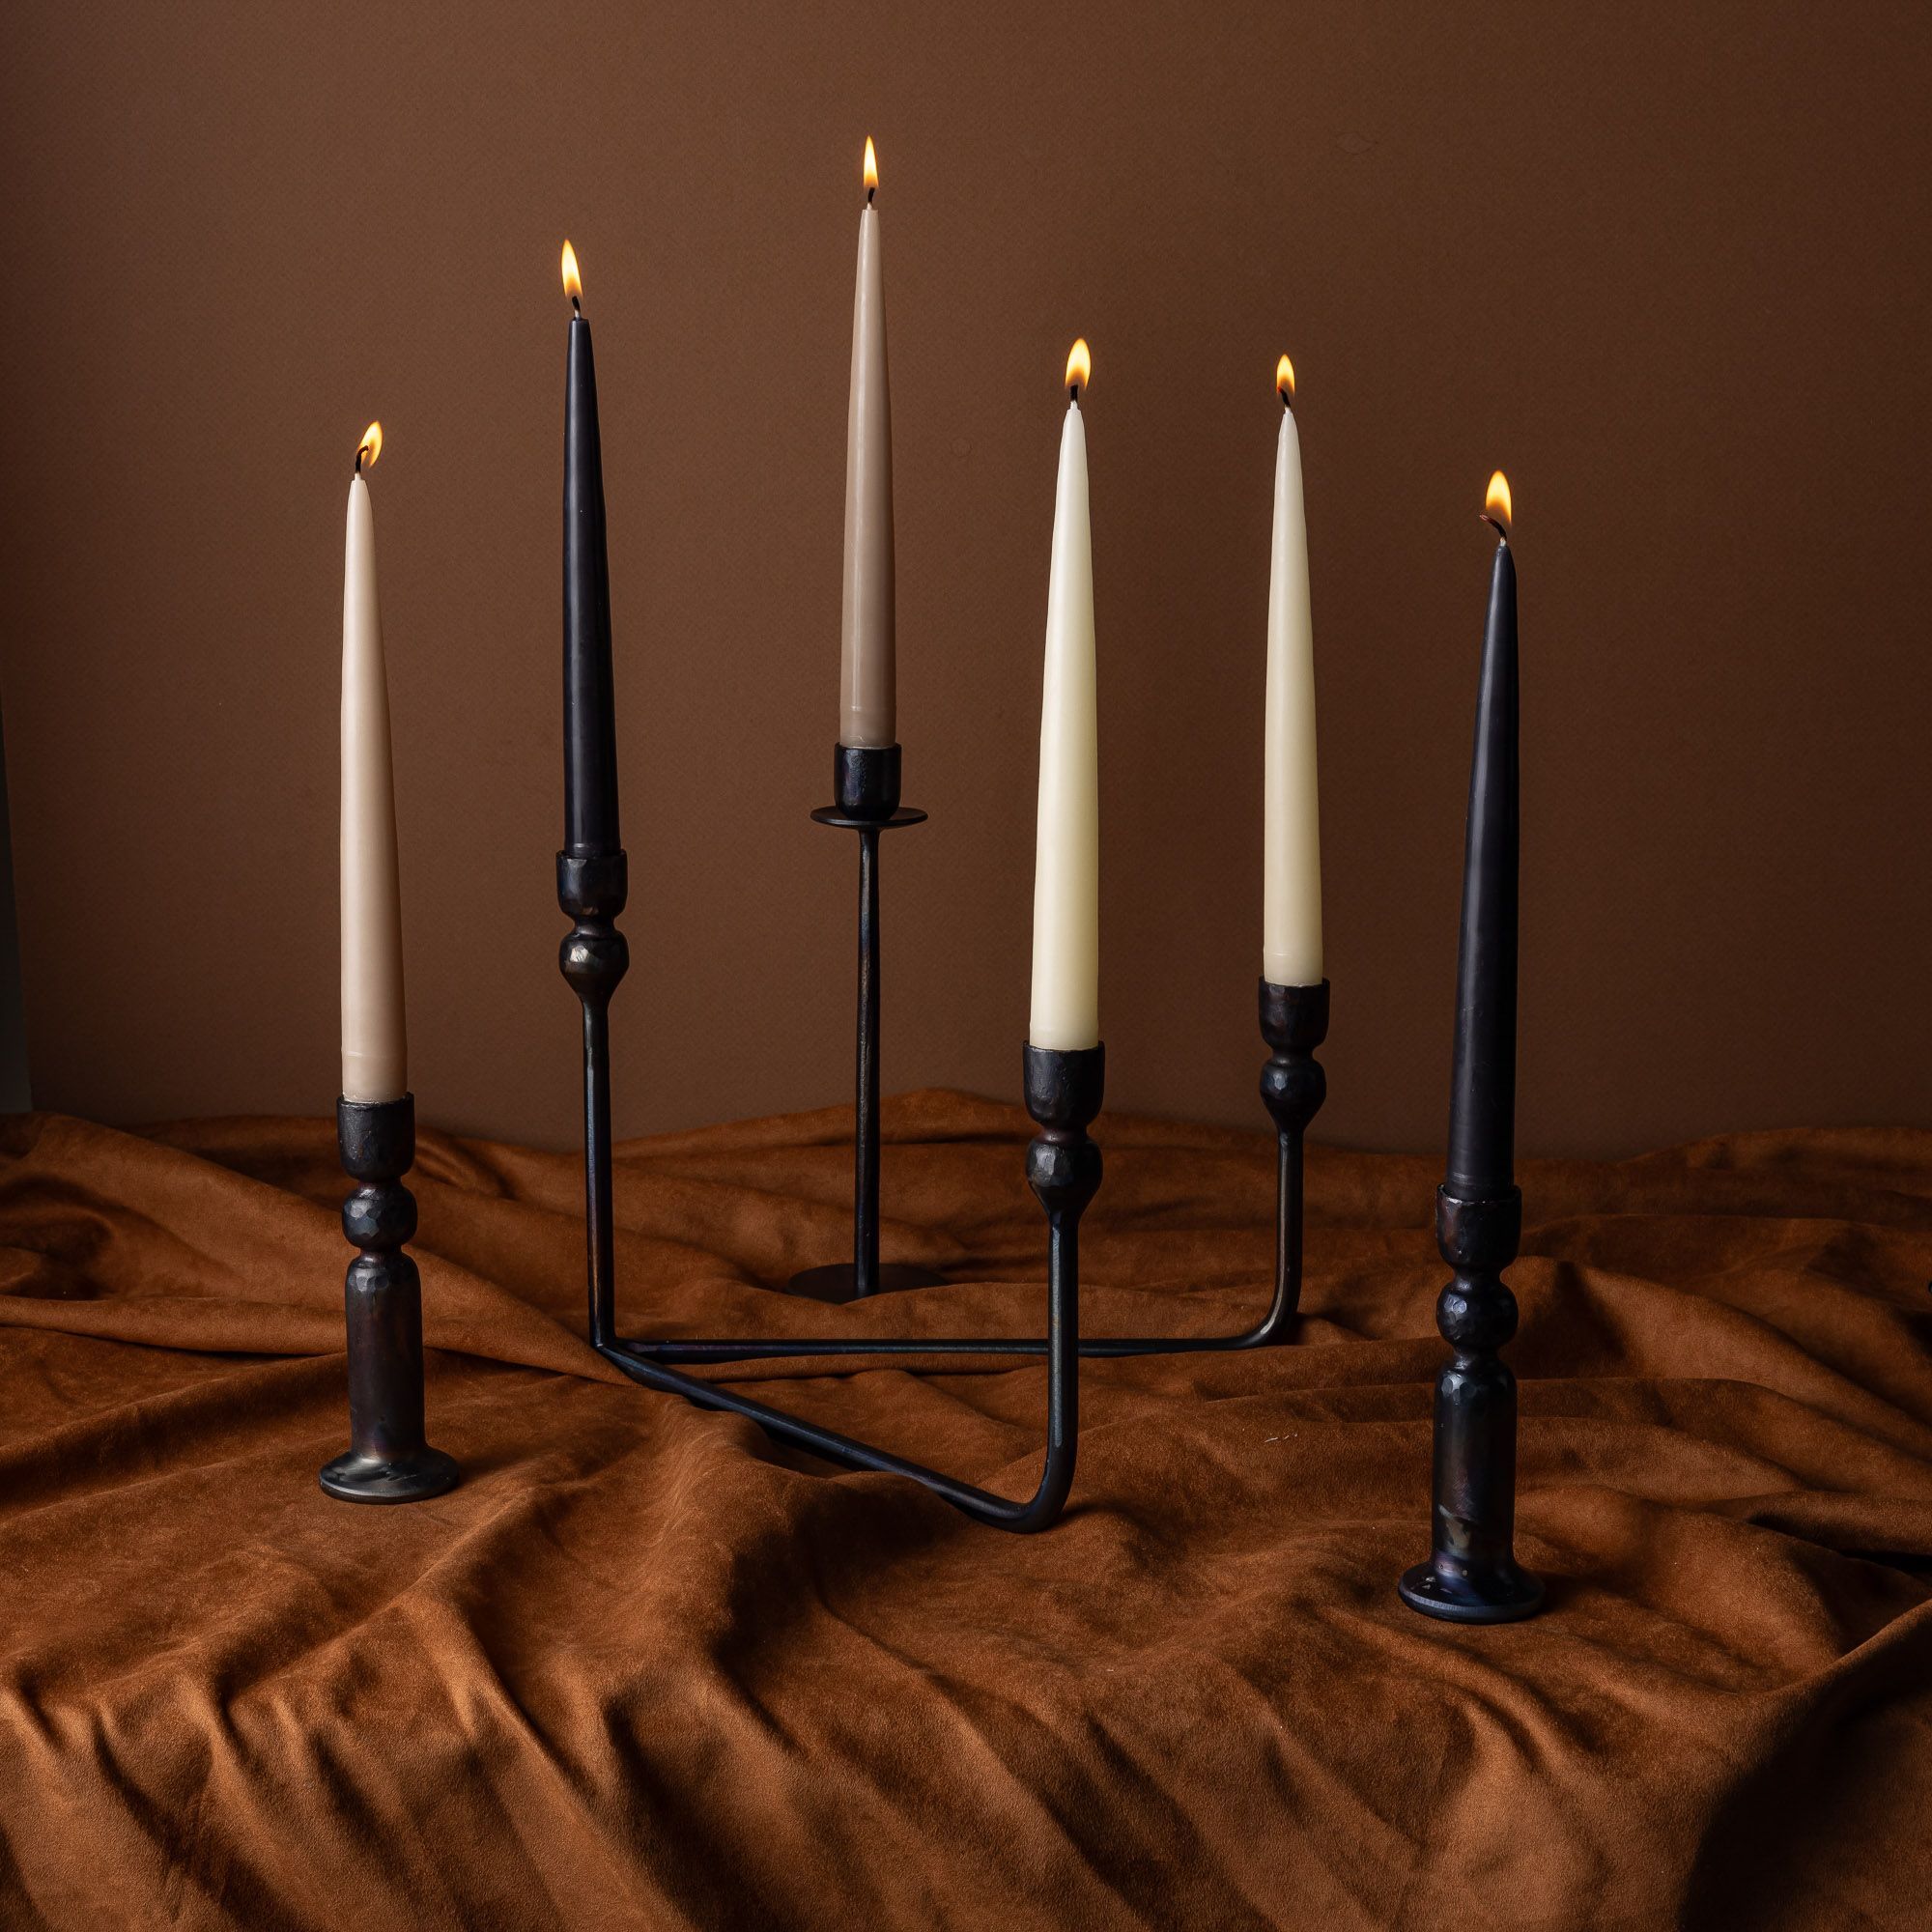 An assortment of iron candlestick holders and a candelabra all holding lit tapered candles. They all sit on a brown fabric with a brown background.